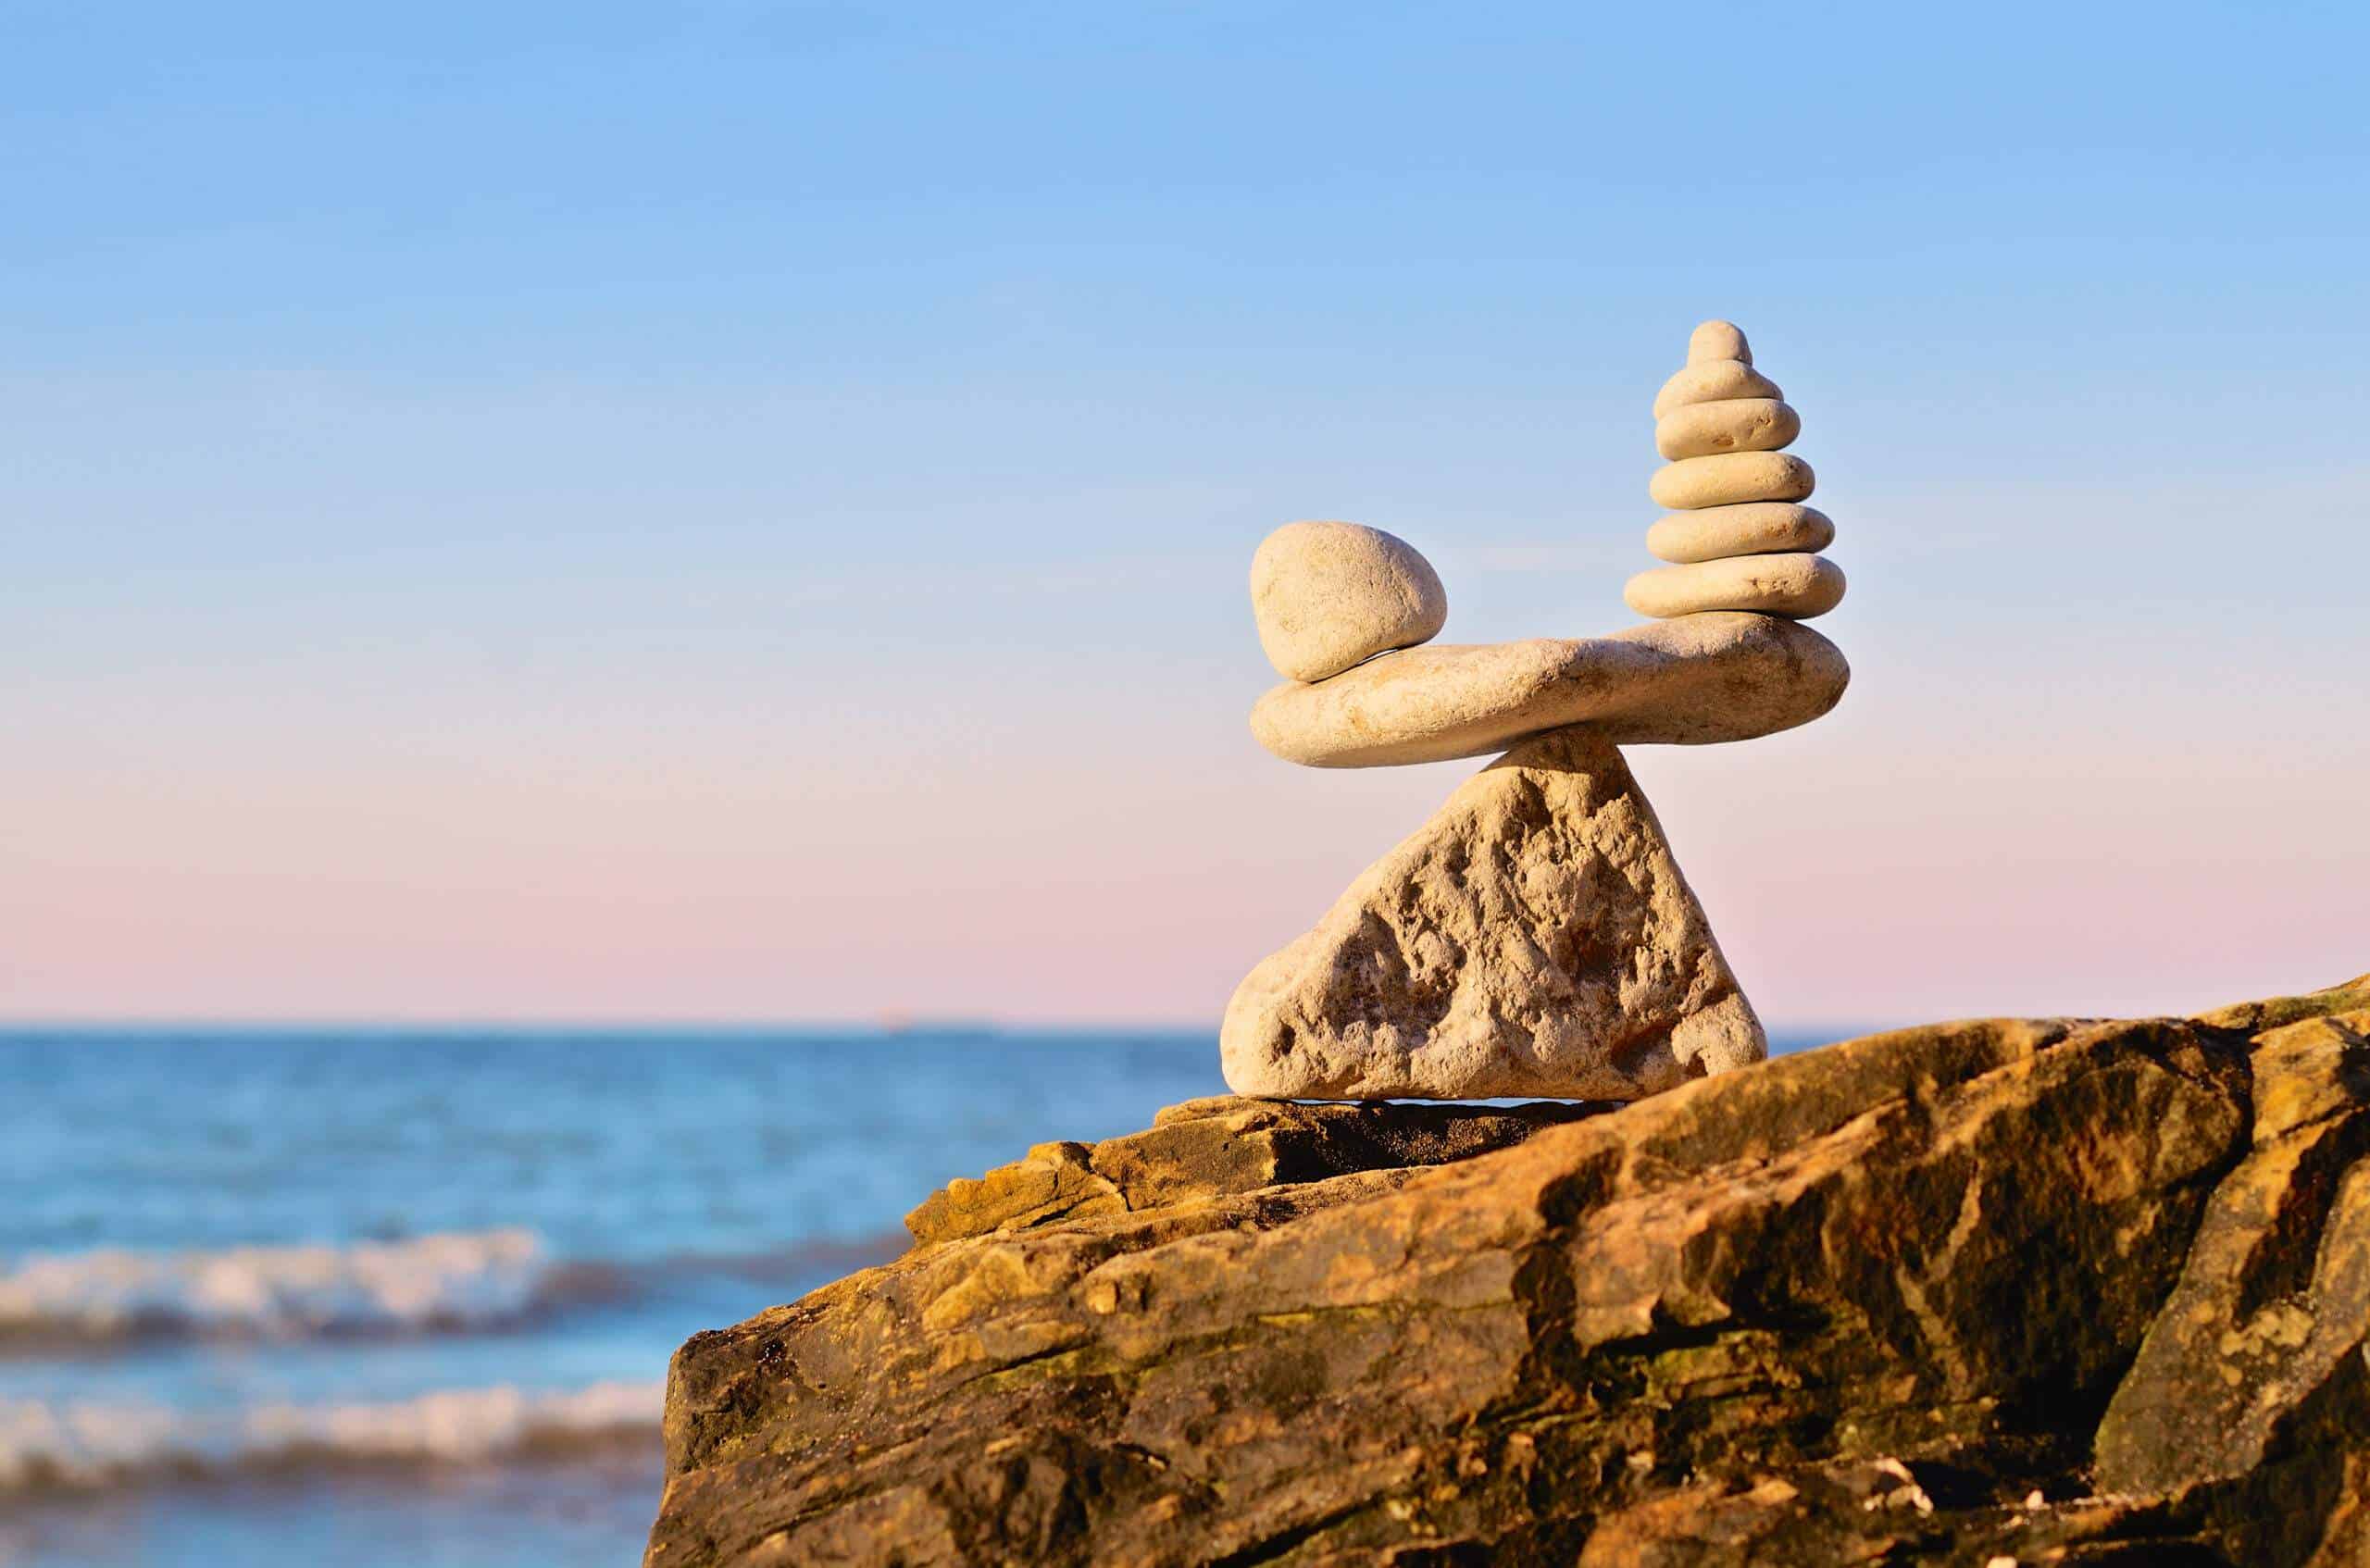 Tips for finding balance in life to reduce stress